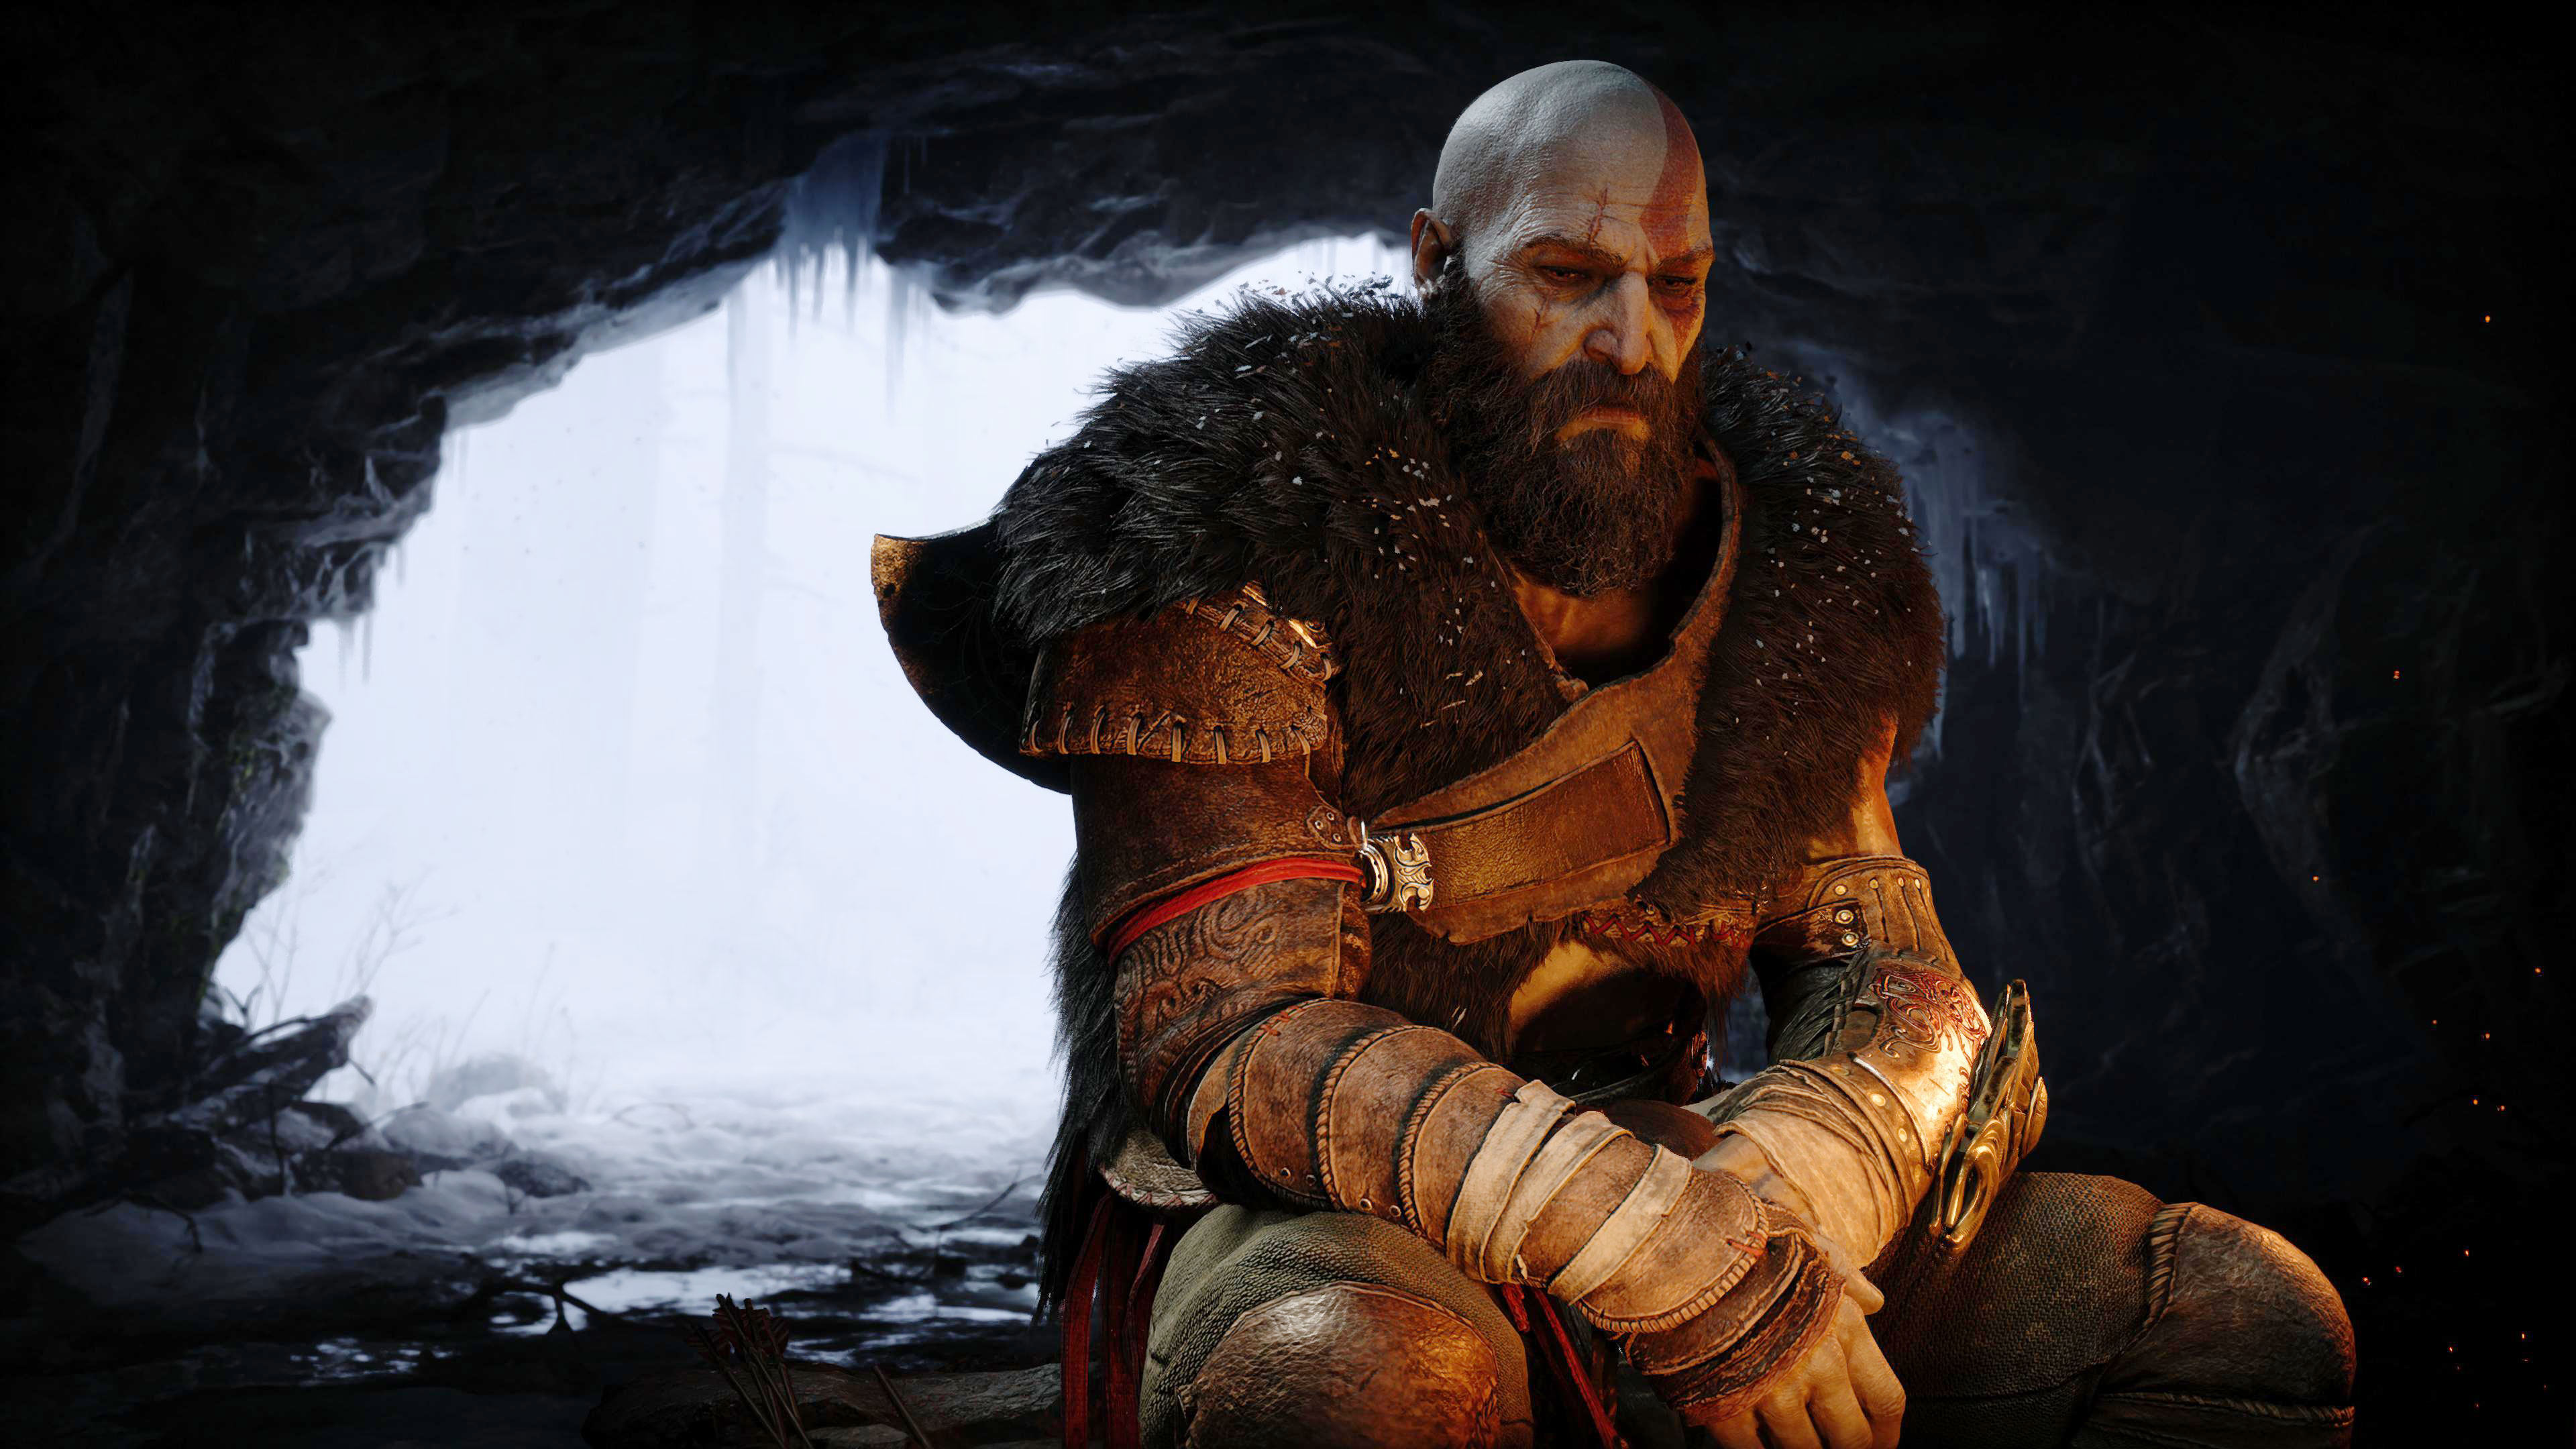 Kratos, wearing heavy animal furs and a scowl on his face, sits in front of a fire inside a cave. Behind him, we can see a wintery, cold world in the cave entrance. 